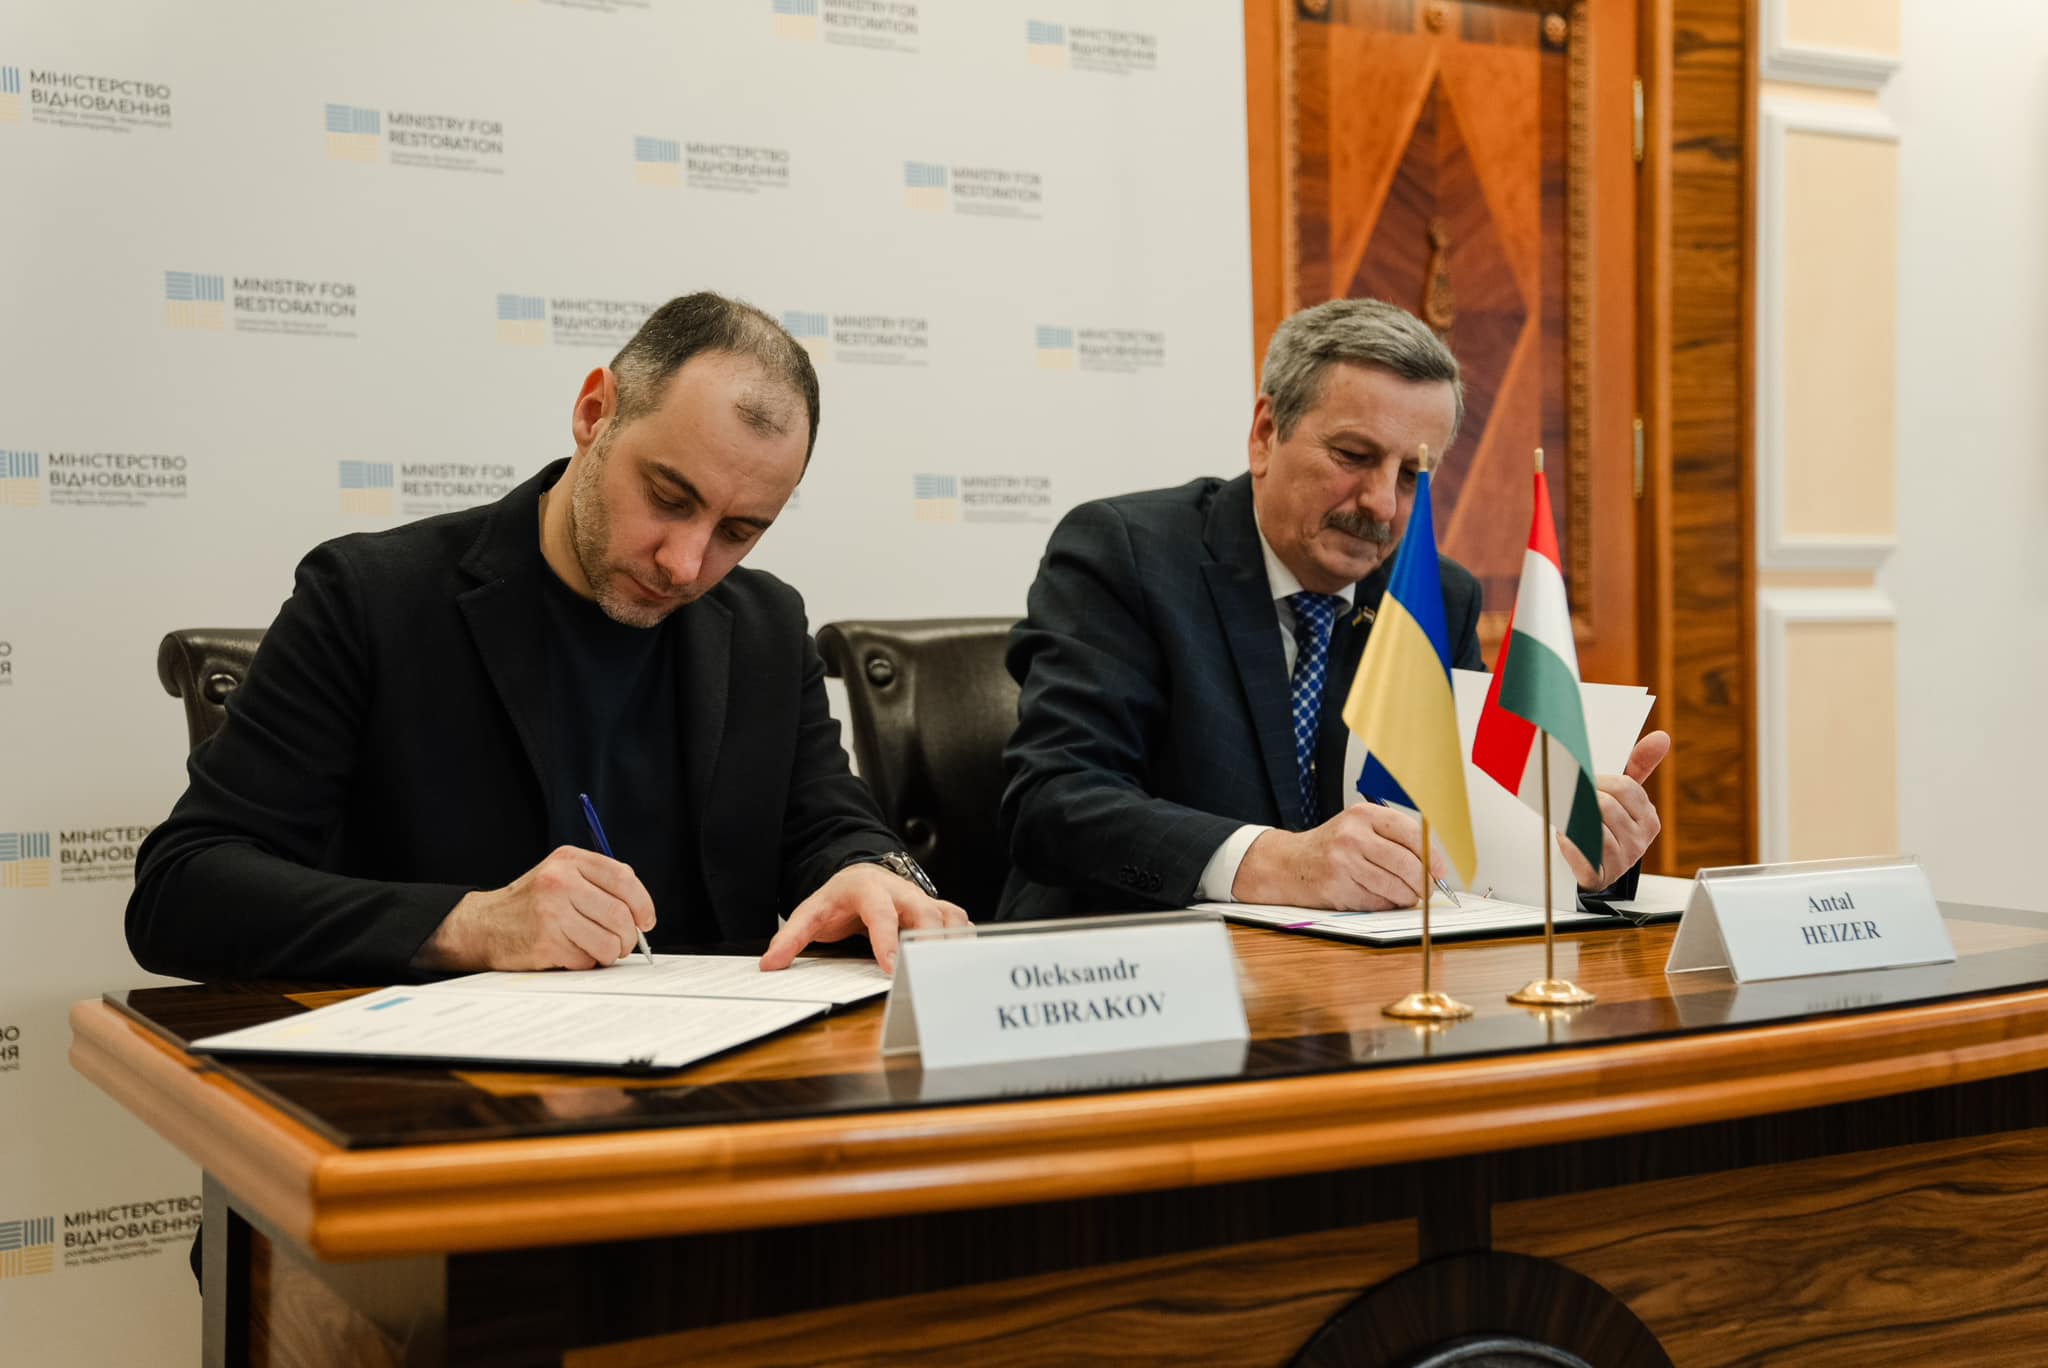 Ukraine and Hungary have agreed to open a new border crossing point